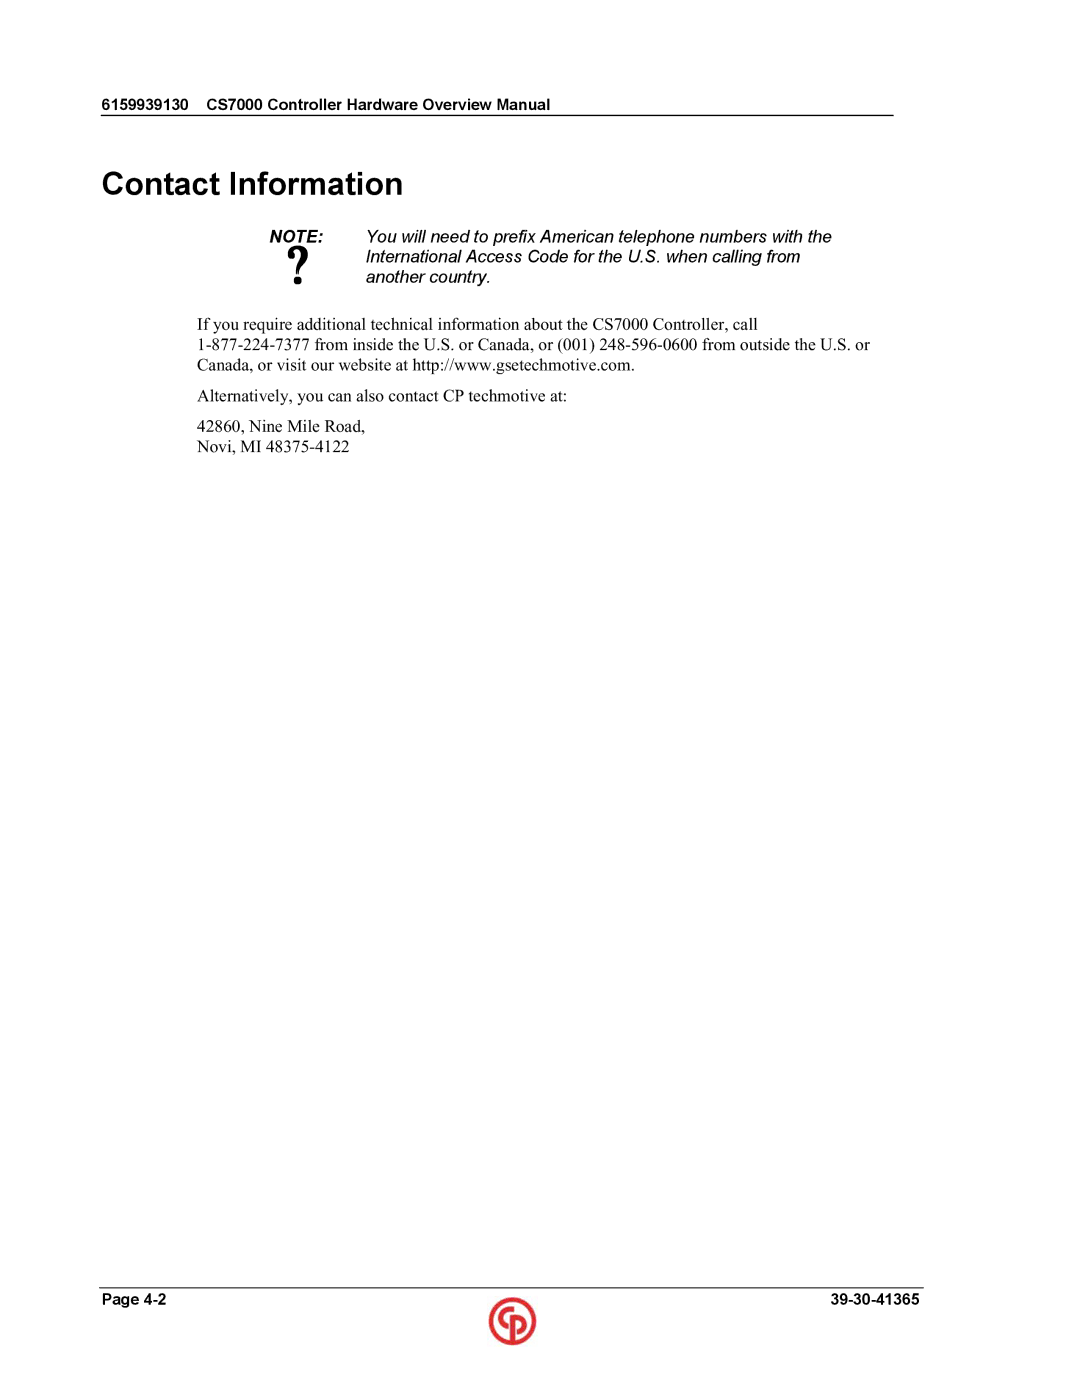 Chicago Pneumatic CS7000 manual Contact Information, Another country 